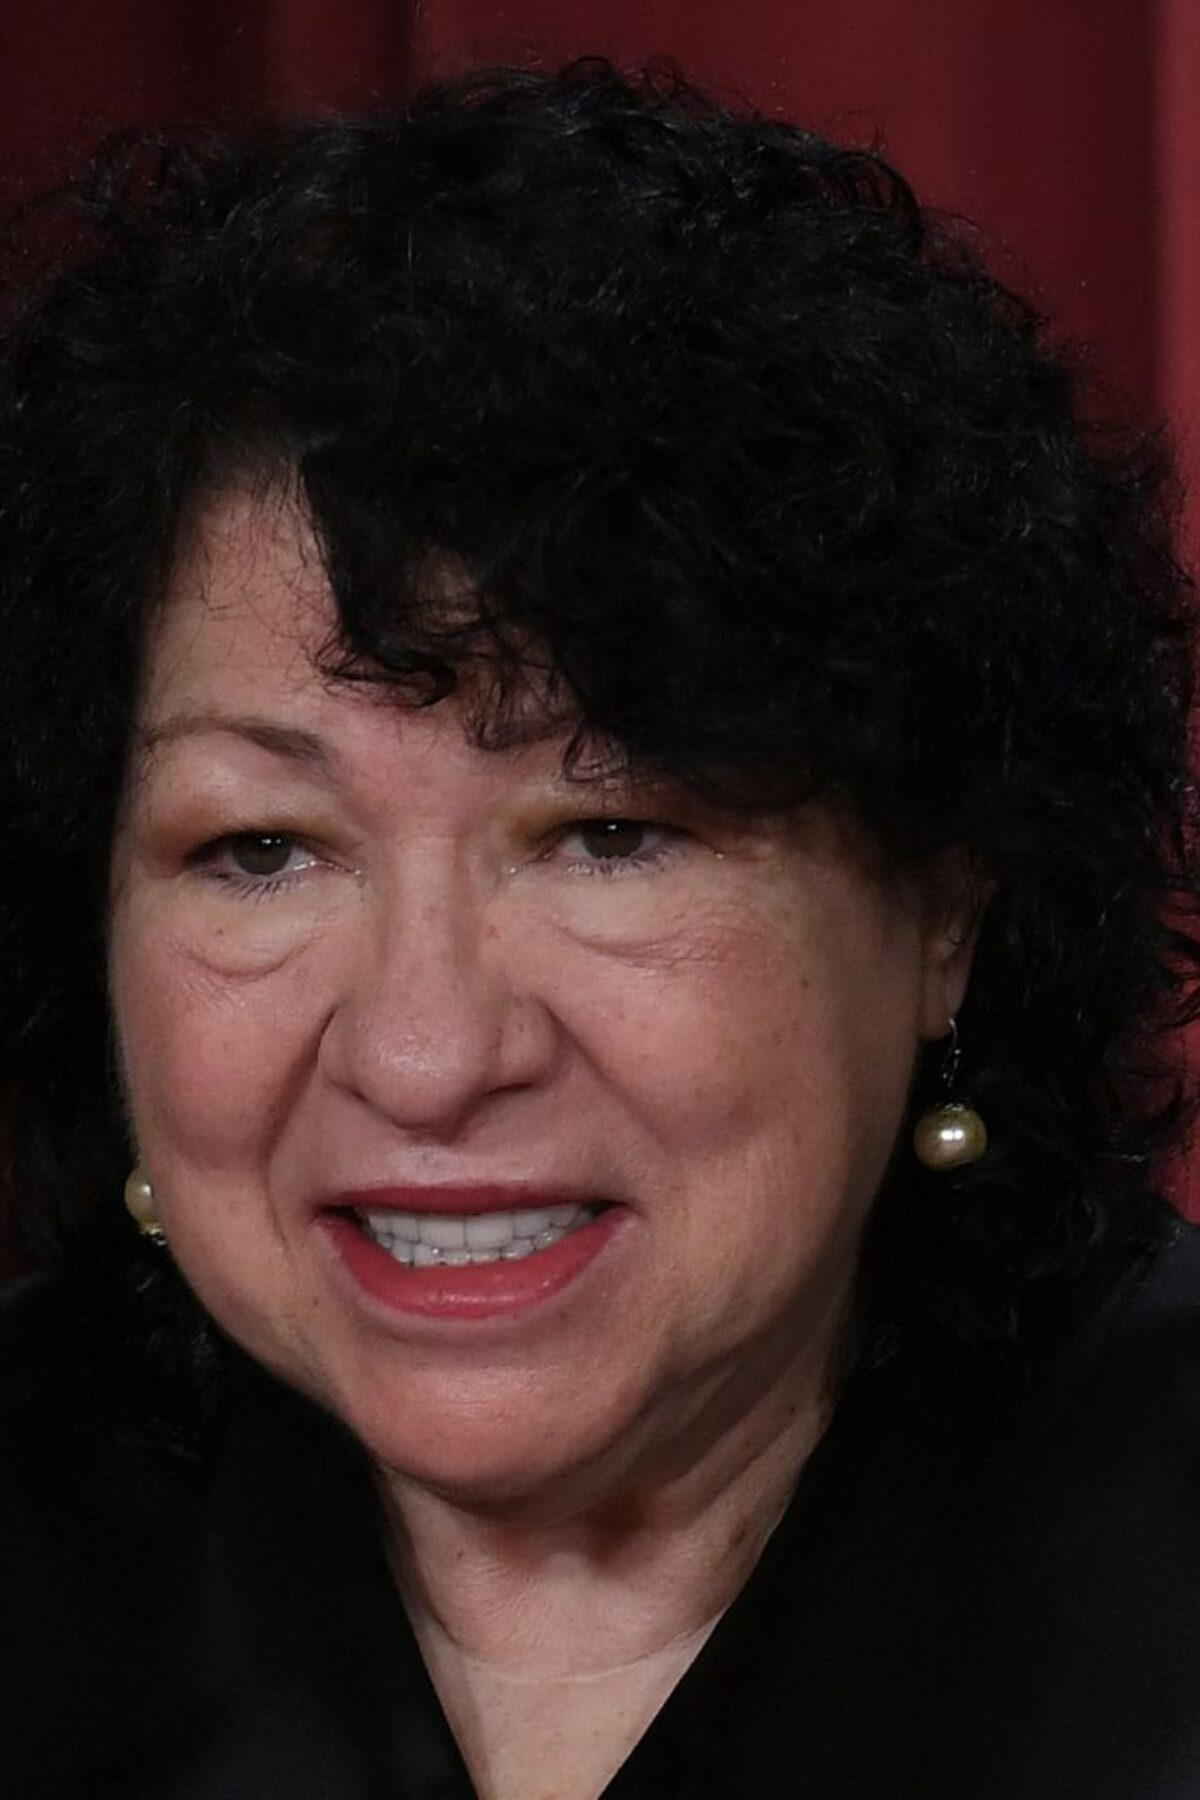 Associate US Supreme Court Justice Sonia Sotomayor poses for the official photo at the Supreme Court in Washington, DC on October 7, 2022. (Photo by OLIVIER DOULIERY / AFP) (Photo by OLIVIER DOULIERY/AFP via Getty Images)